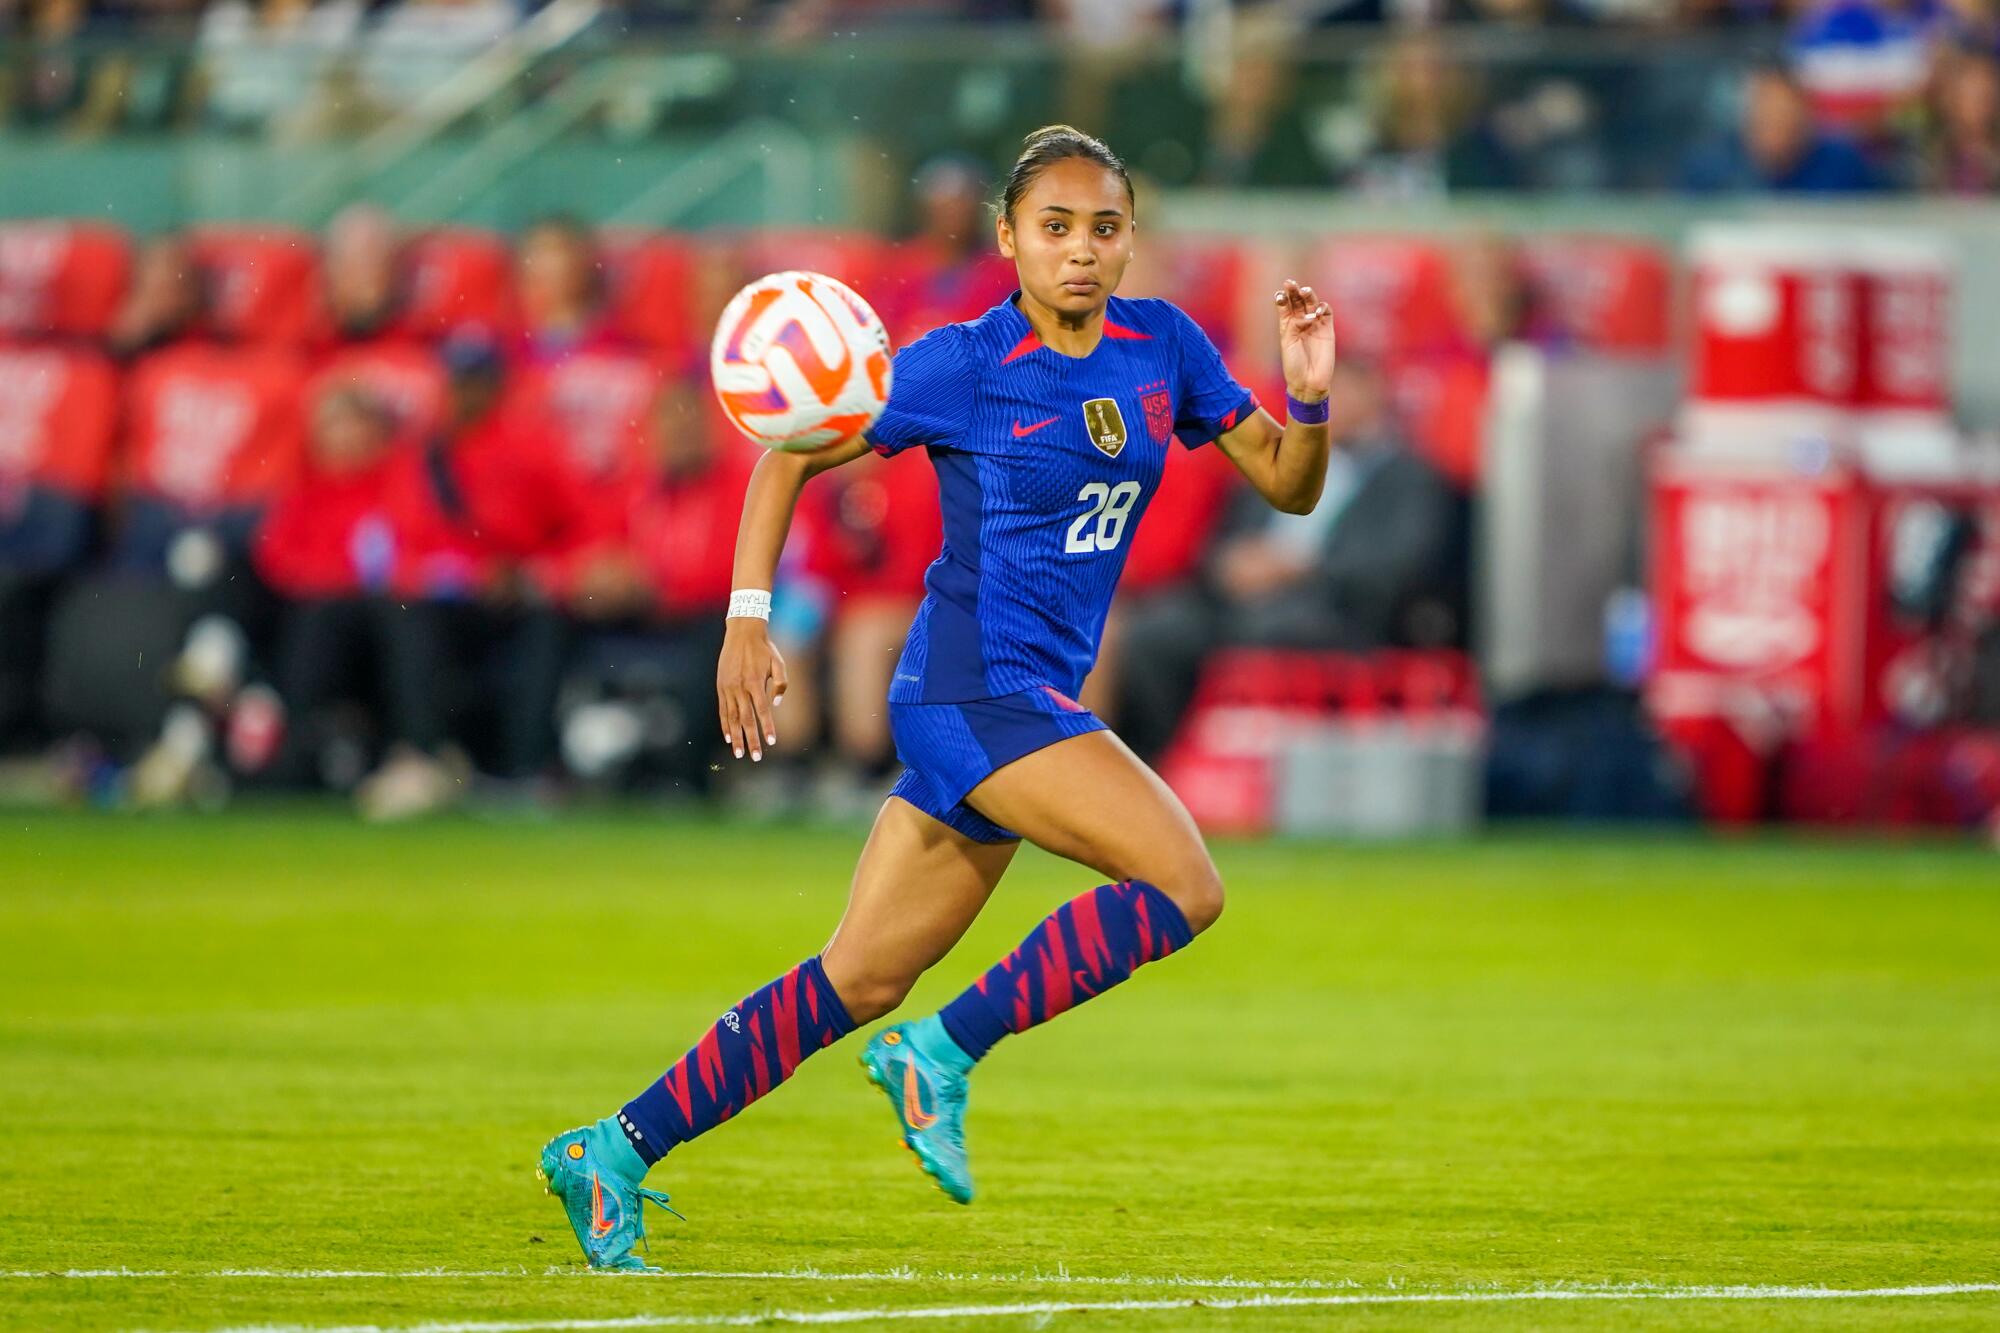 Alyssa Thompson chases the ball during a match between the U.S. National Women's Soccer Team and Ireland.